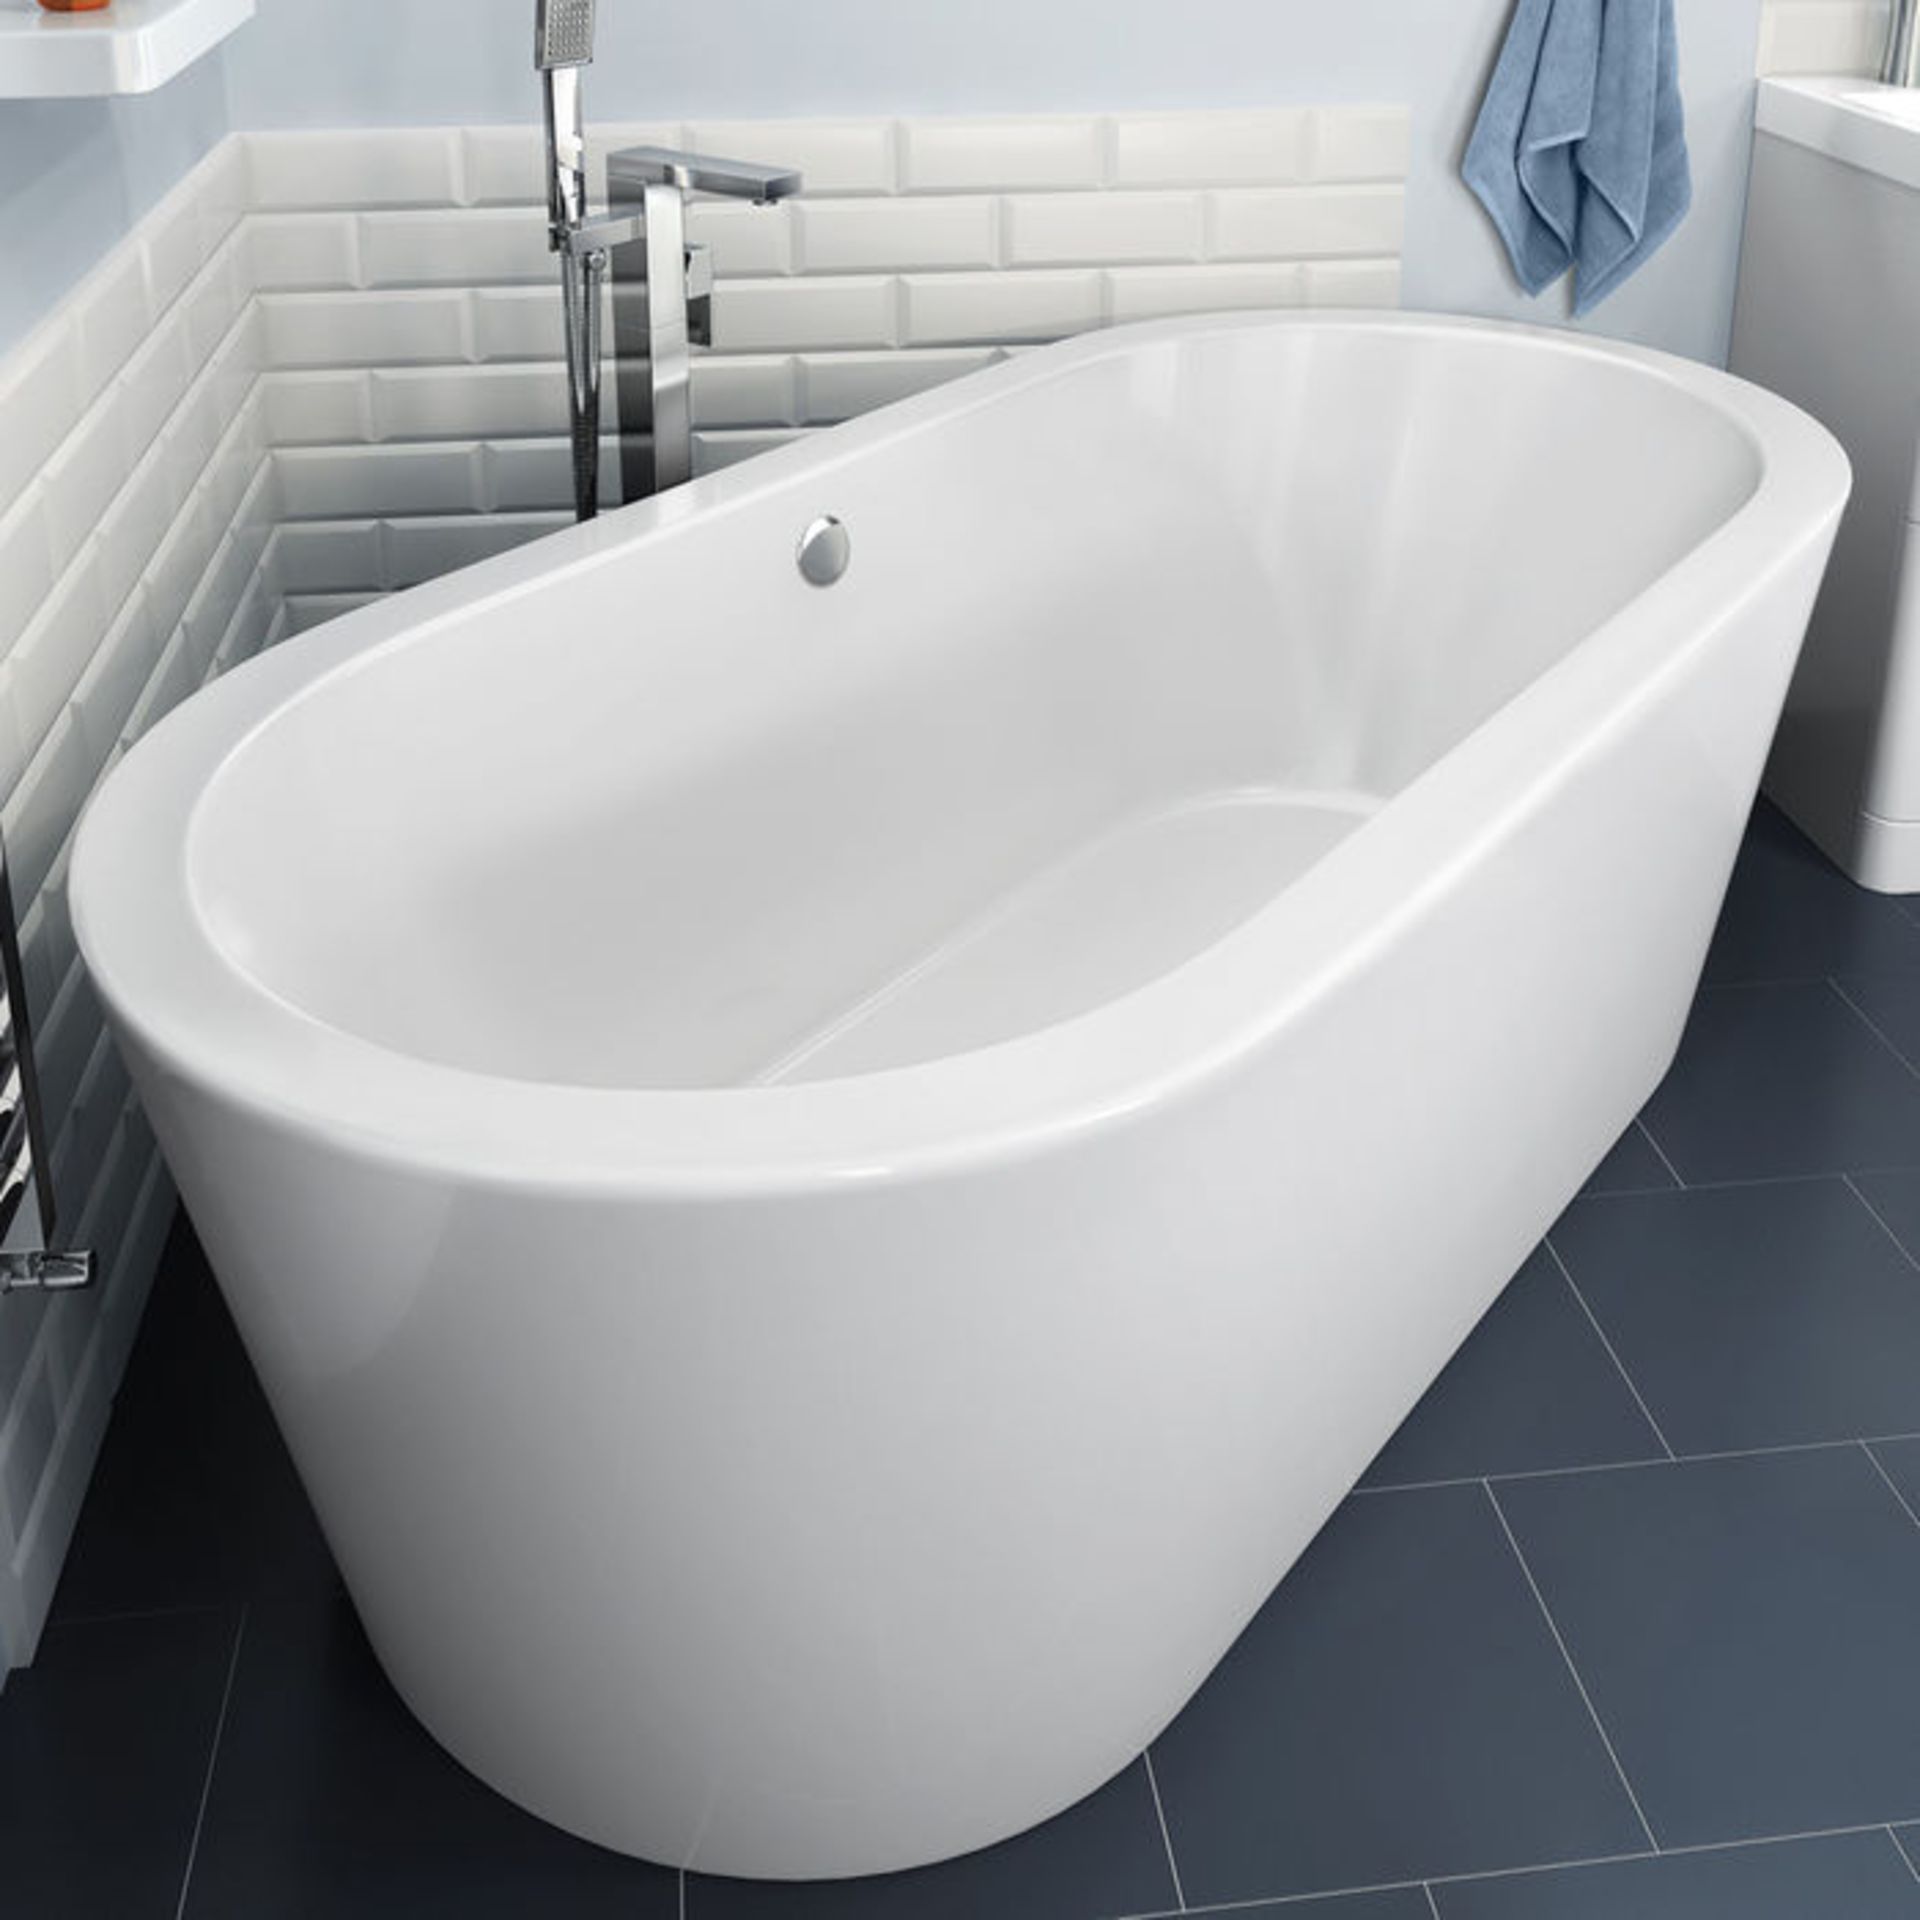 (GR176) 1700X800mm Isla Freestanding Bath. Manufactured from High Quality Acrylic, complimented by a